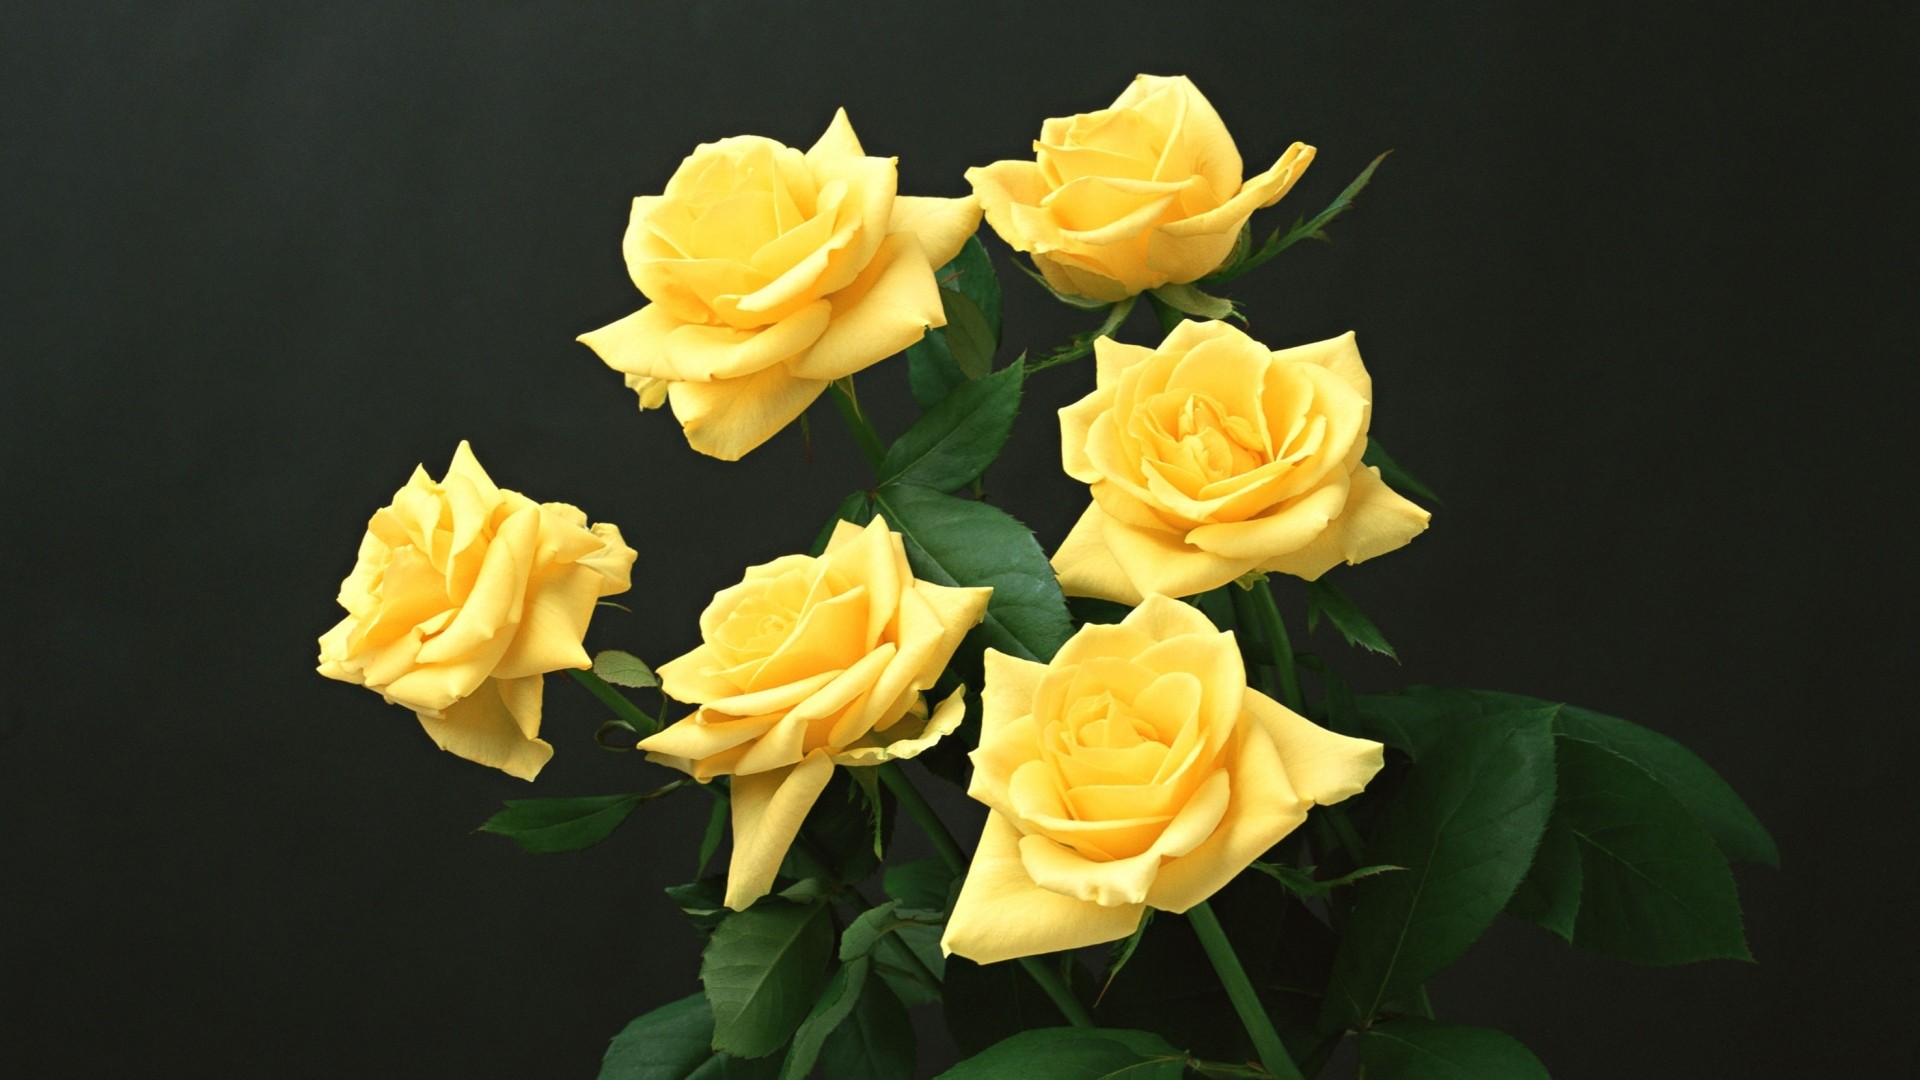 1920x1080  Wallpaper yellow, roses, black background, flowers